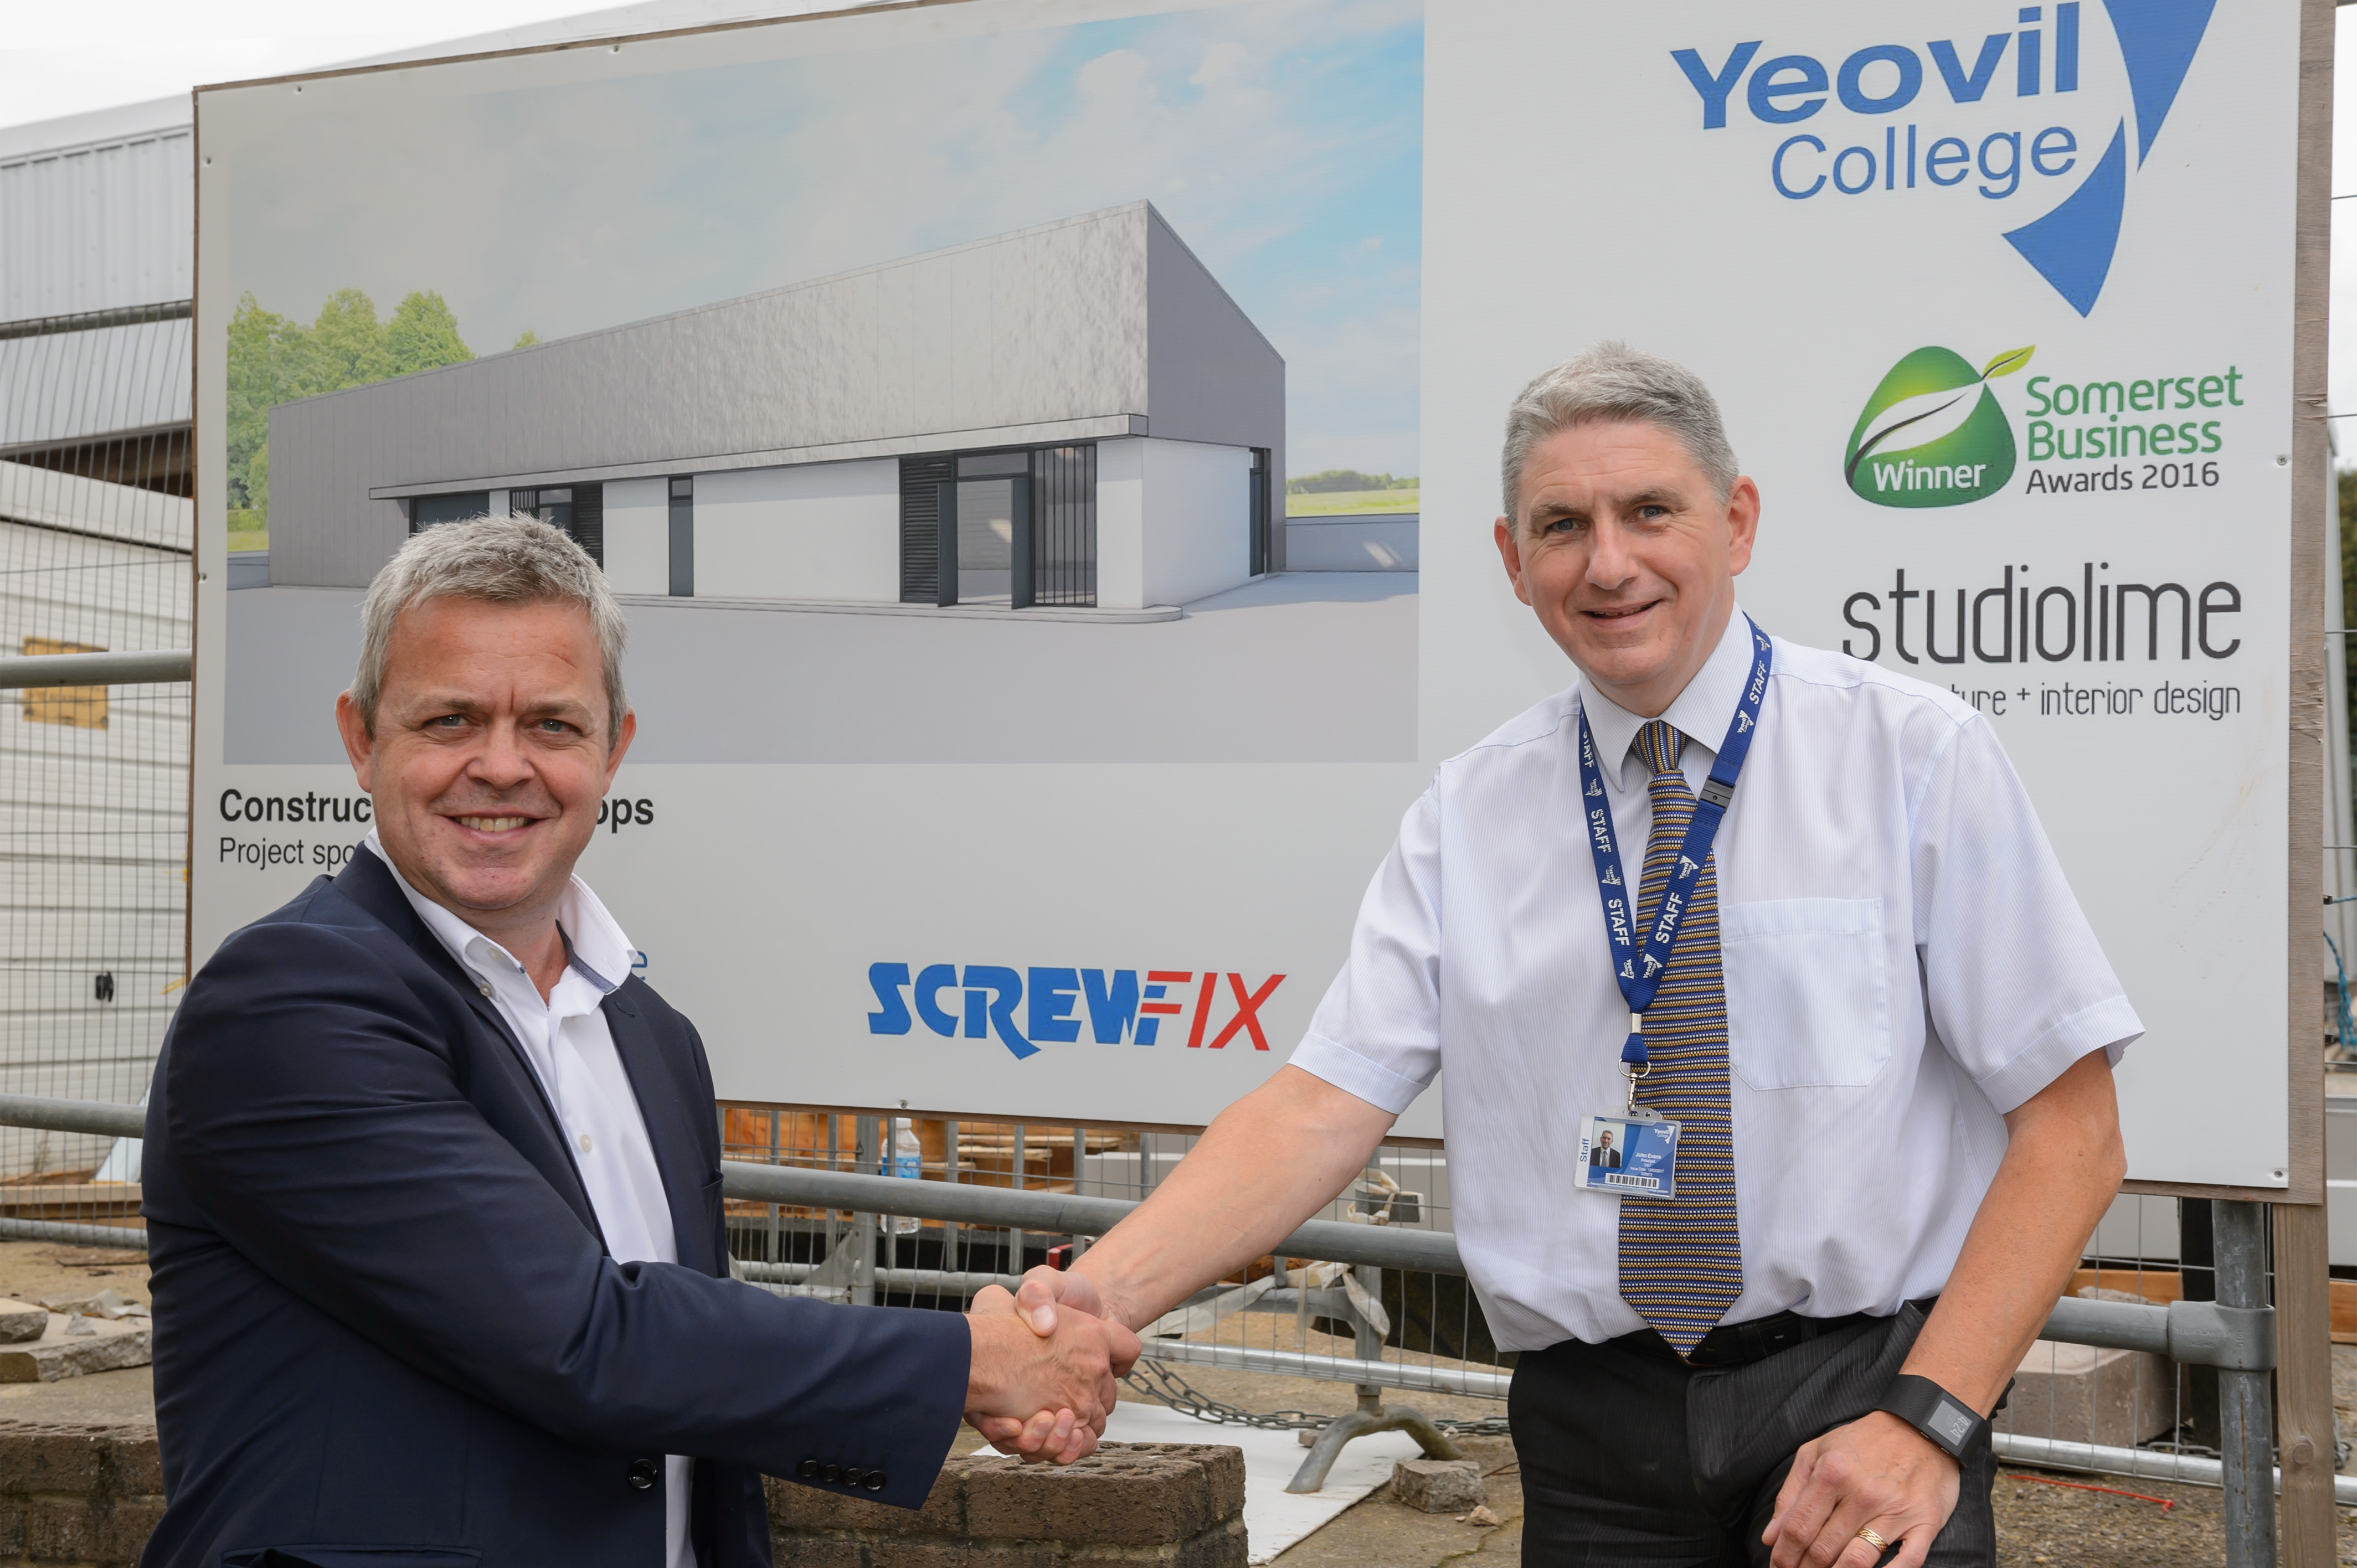 Screwfix invests in the future of trade with new course and purpose-built construction centre at Yeovil College